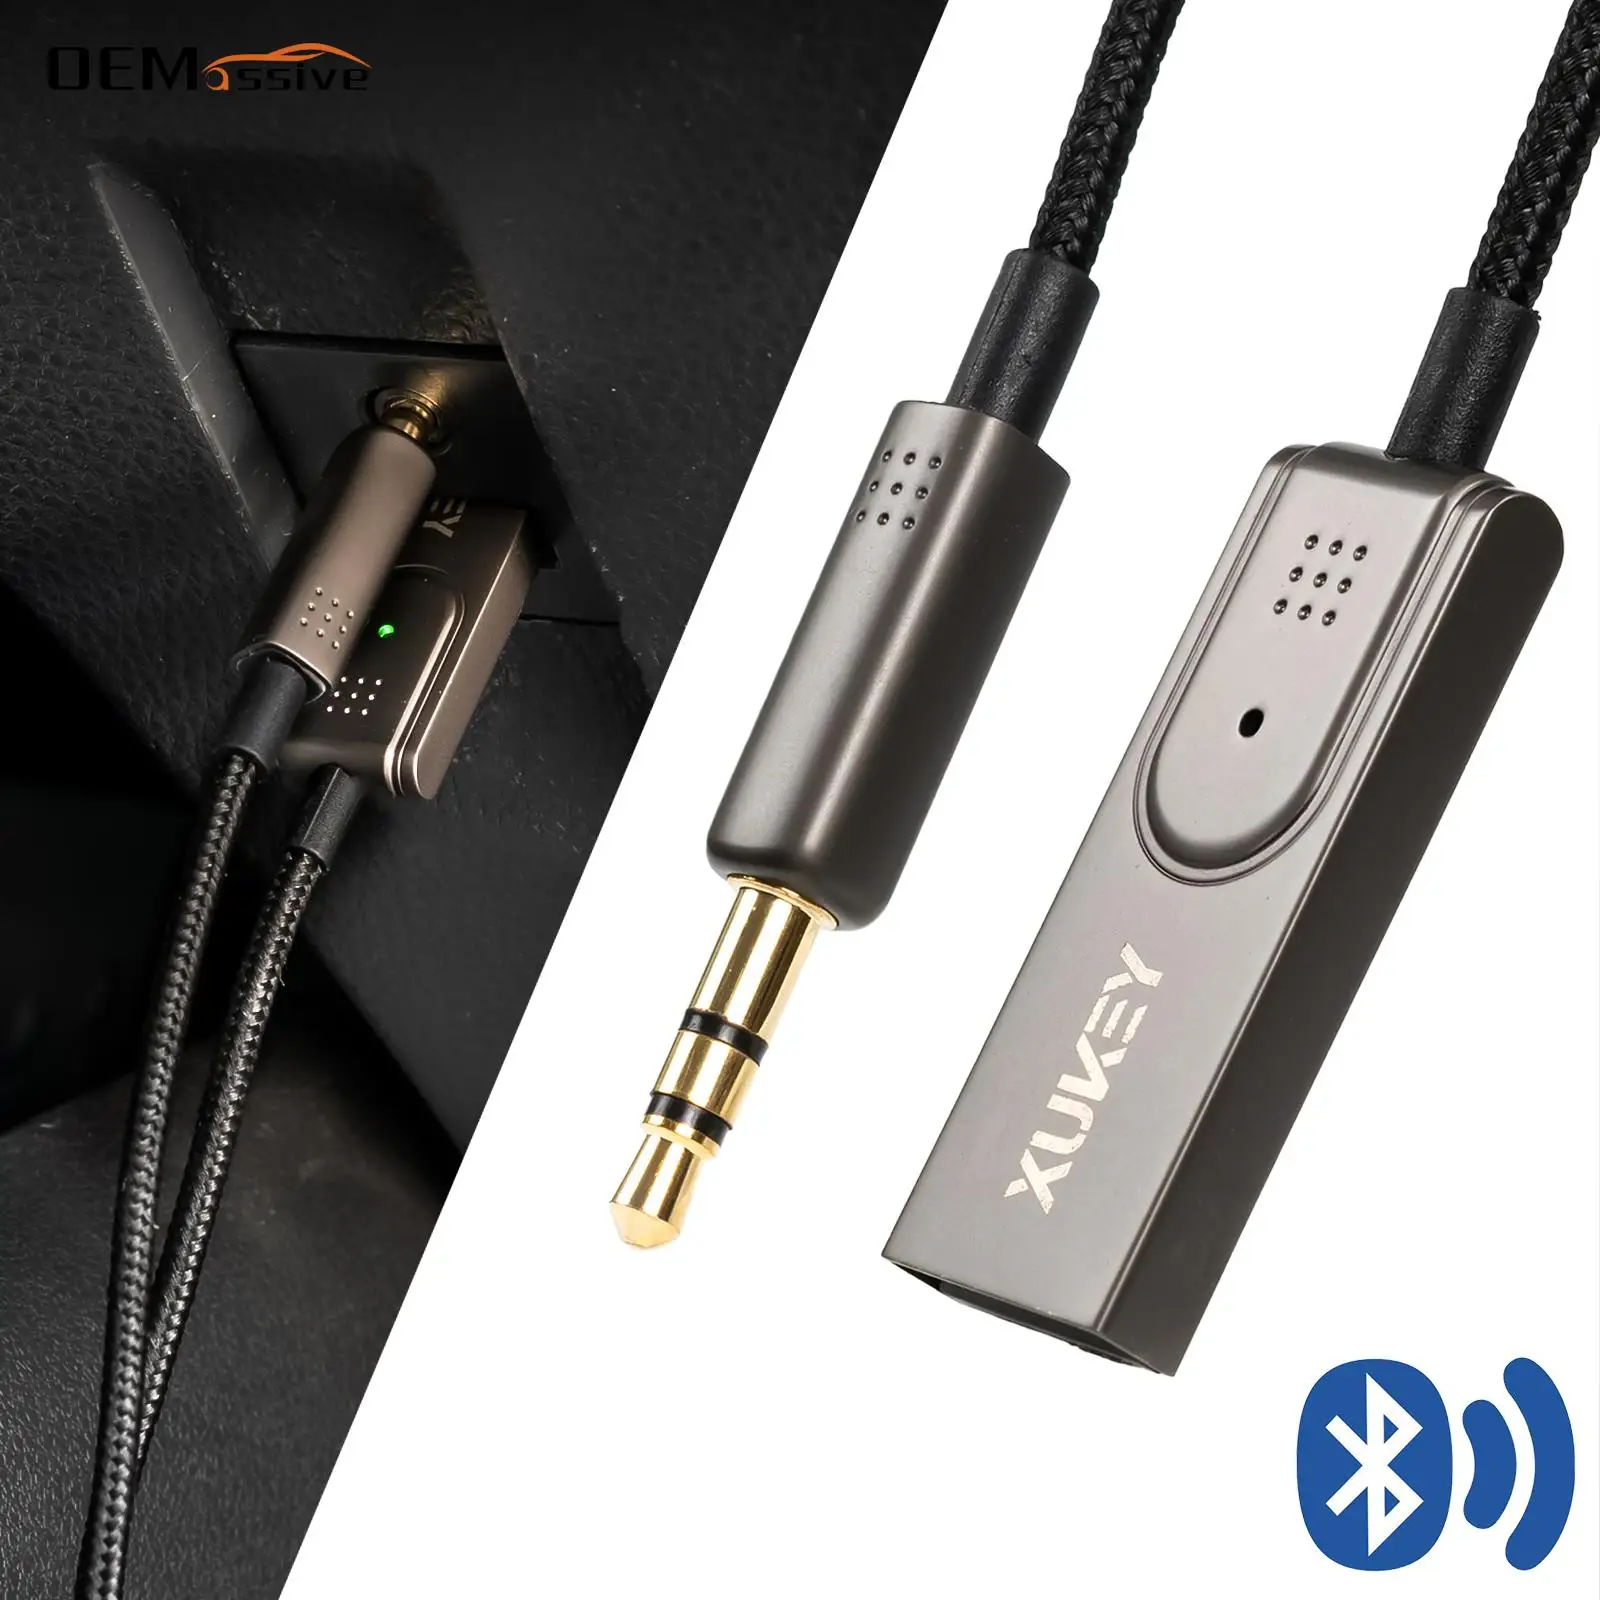 

Wireless Bluetooth 5.0 Receiver Aux Jack Adapter USB 3.5mm Audio Stereo Car Handsfree Kit BT transmitter Music Player Portable